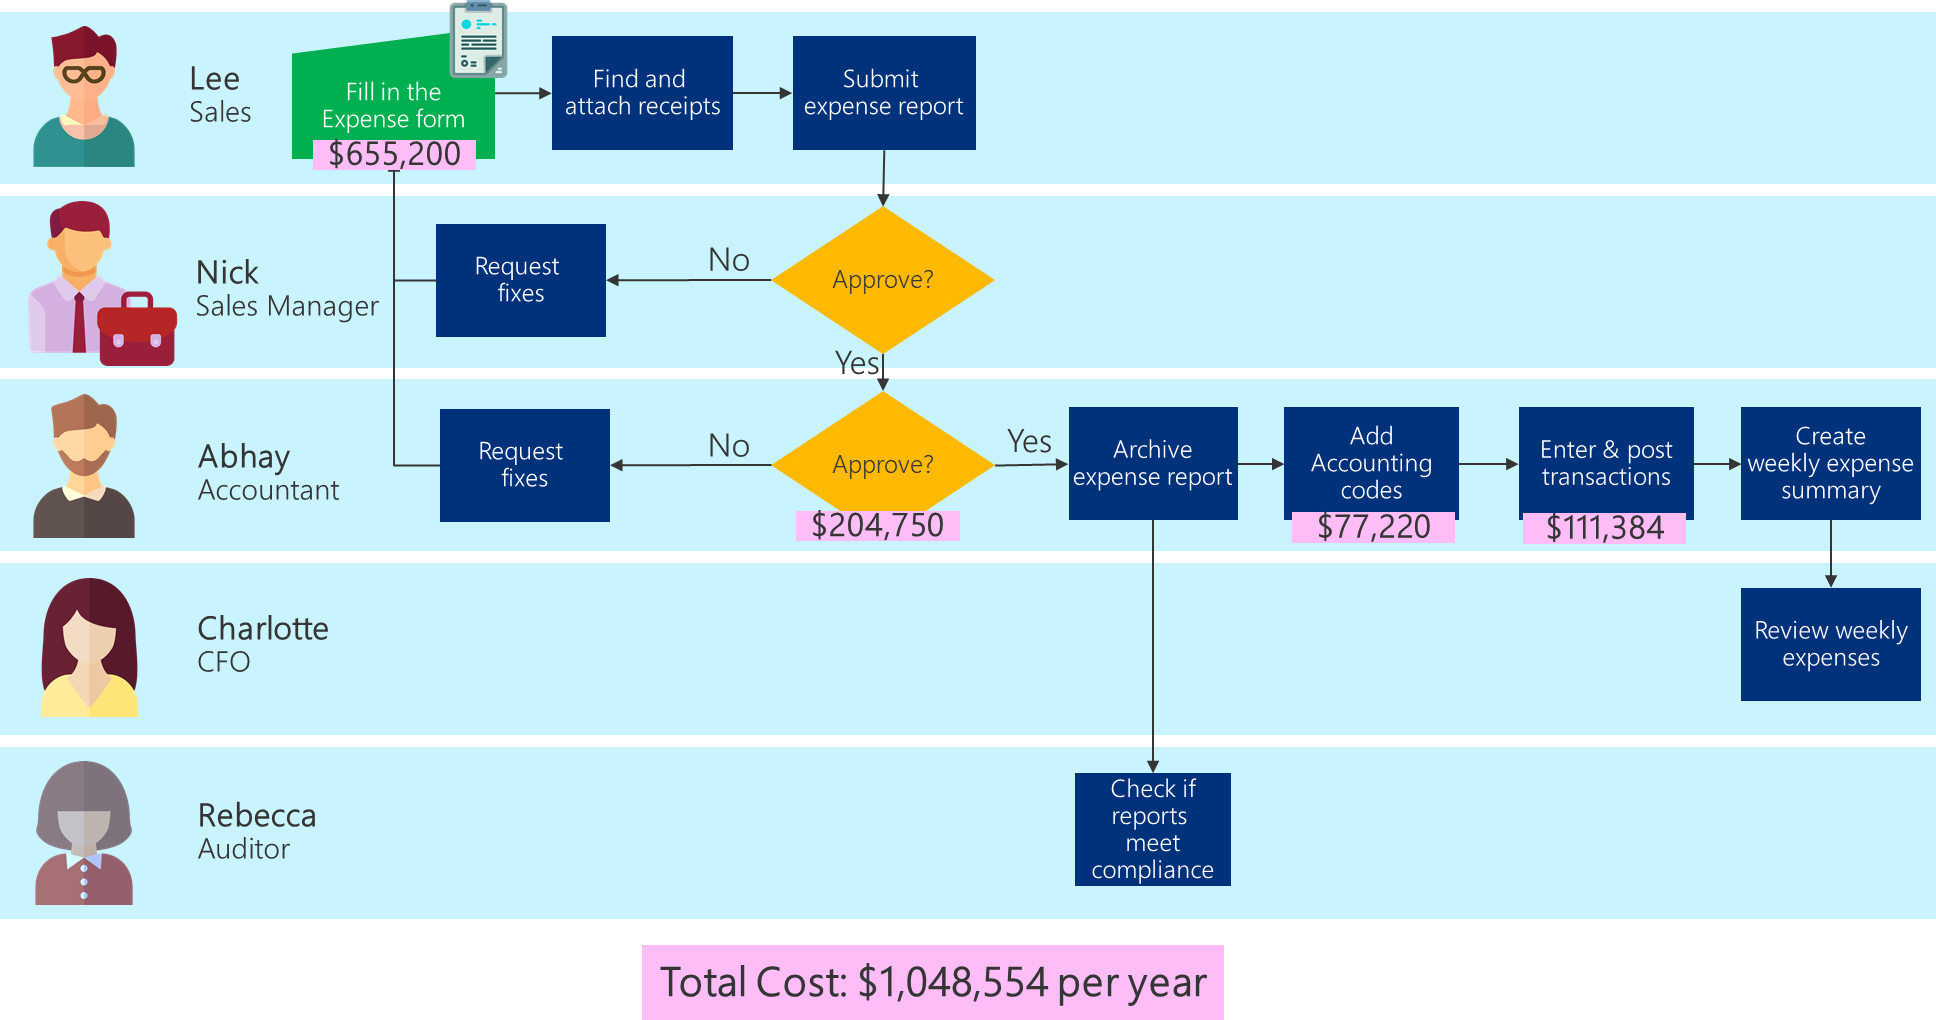 Business process flowchart showing the employee cost for each task and the total cost of the process.